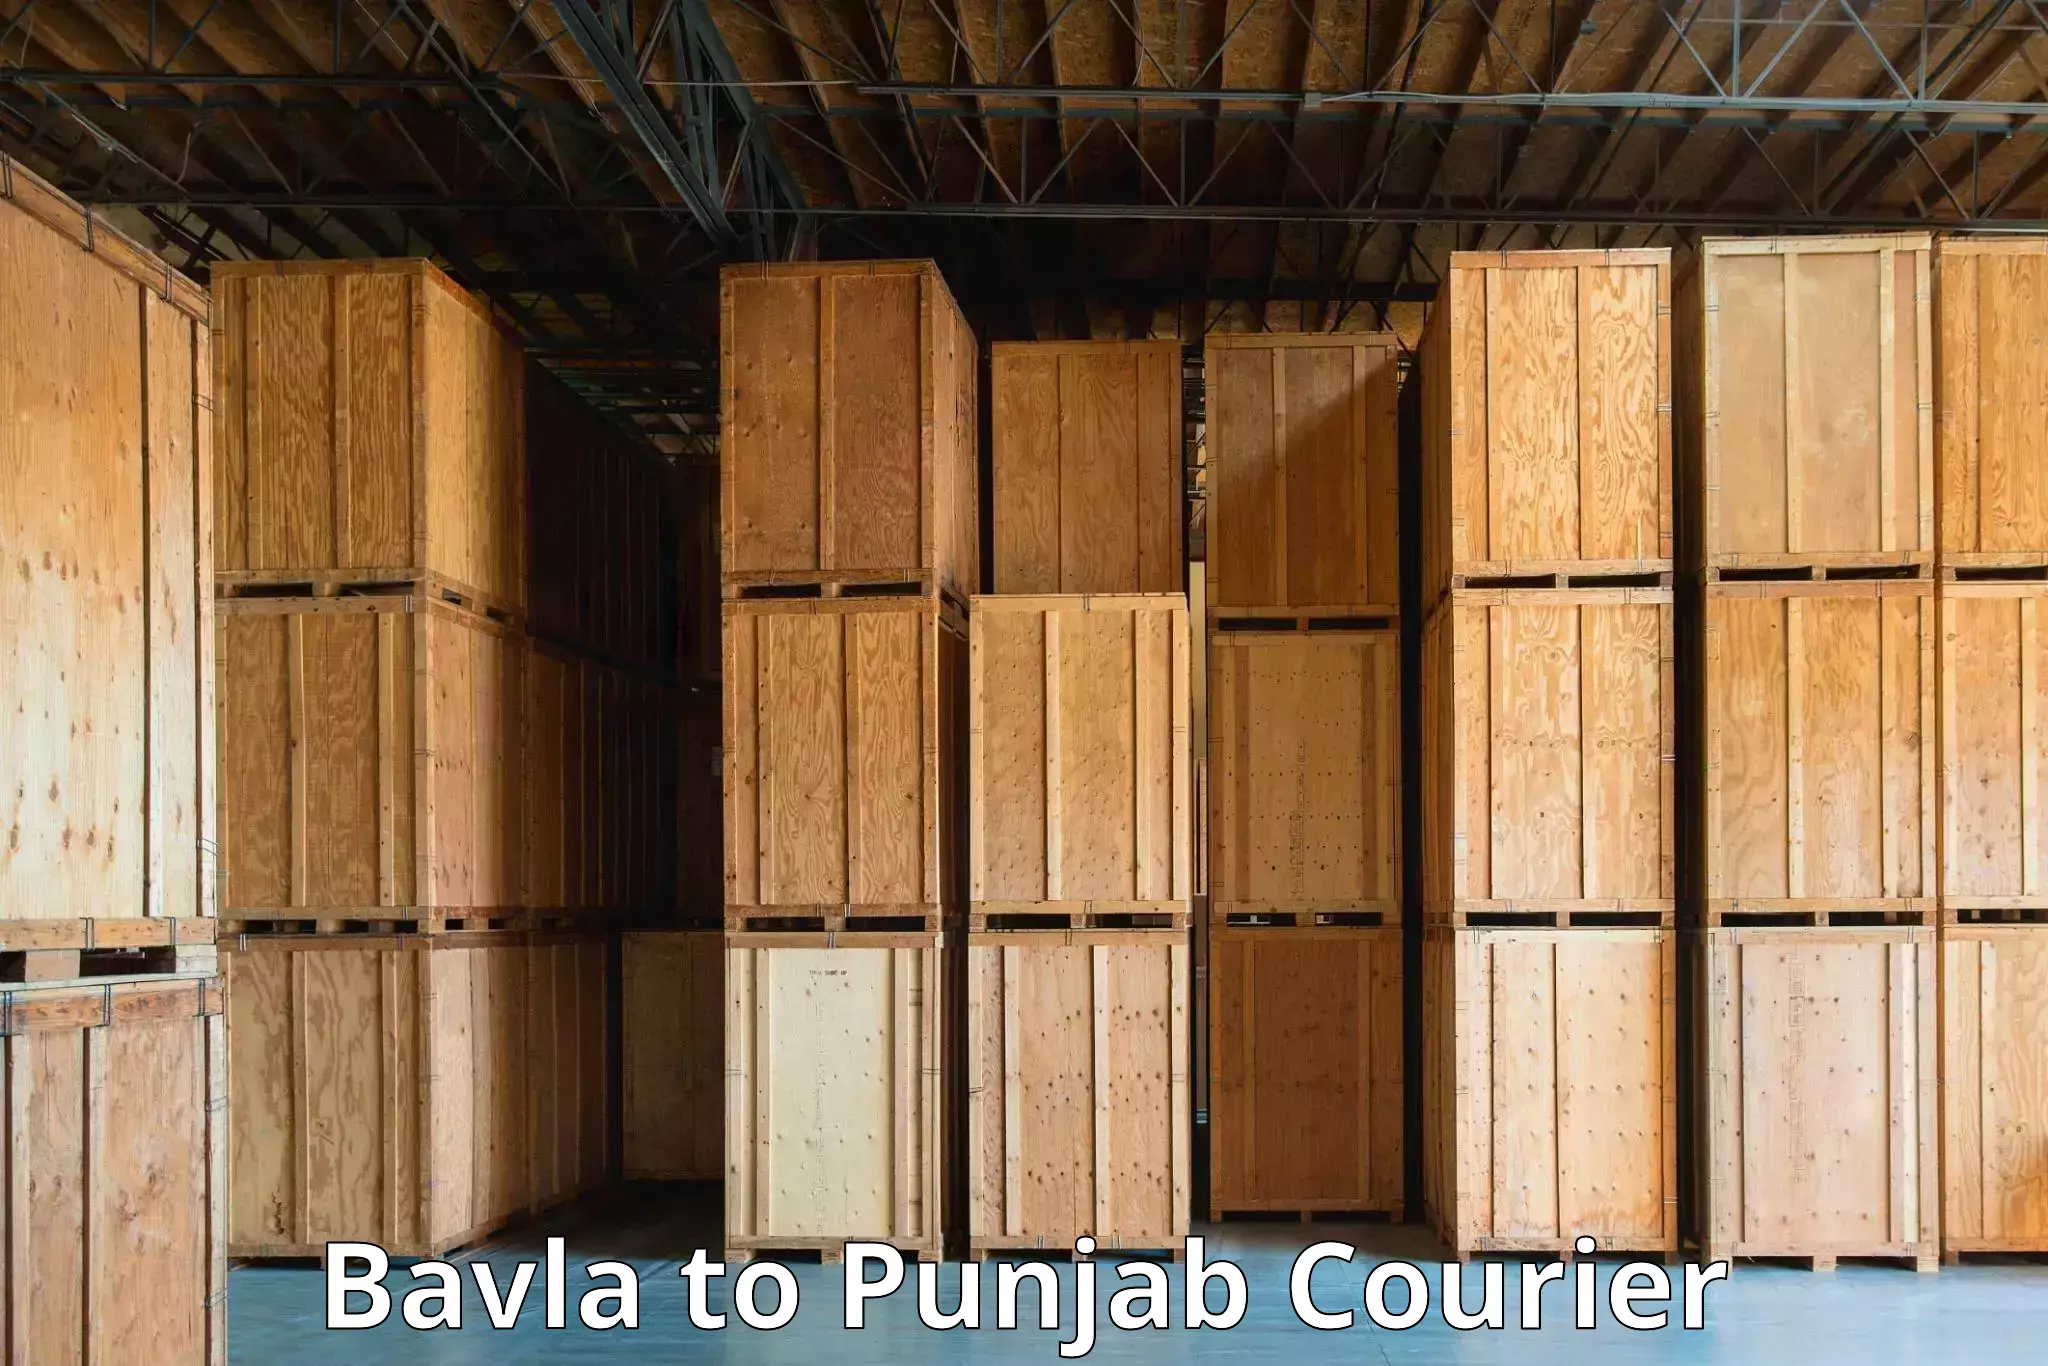 Sustainable shipping practices Bavla to Patiala